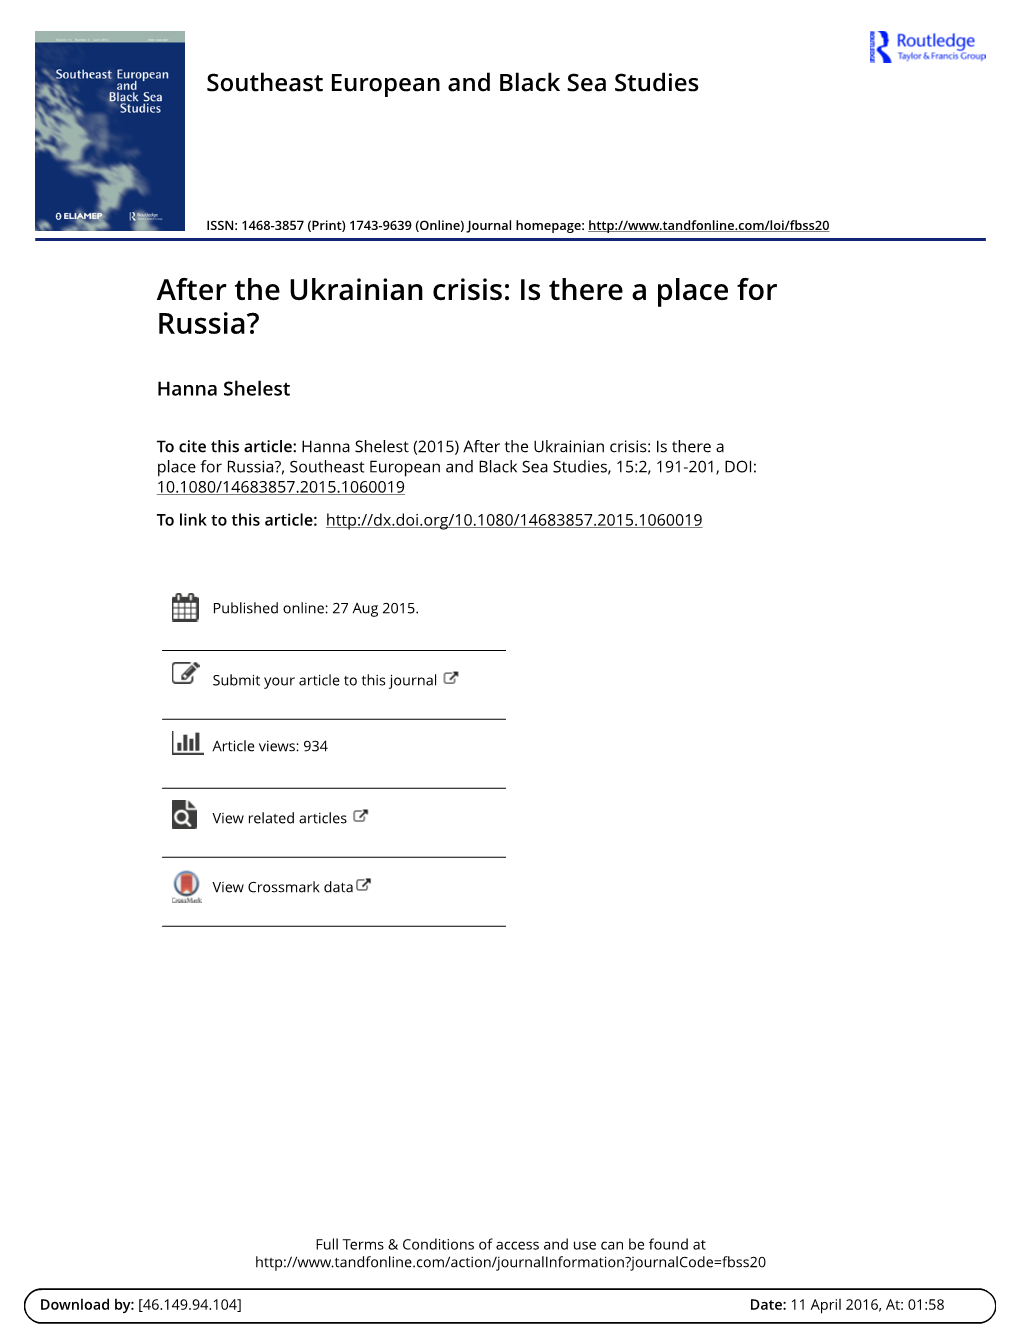 After the Ukrainian Crisis: Is There a Place for Russia?